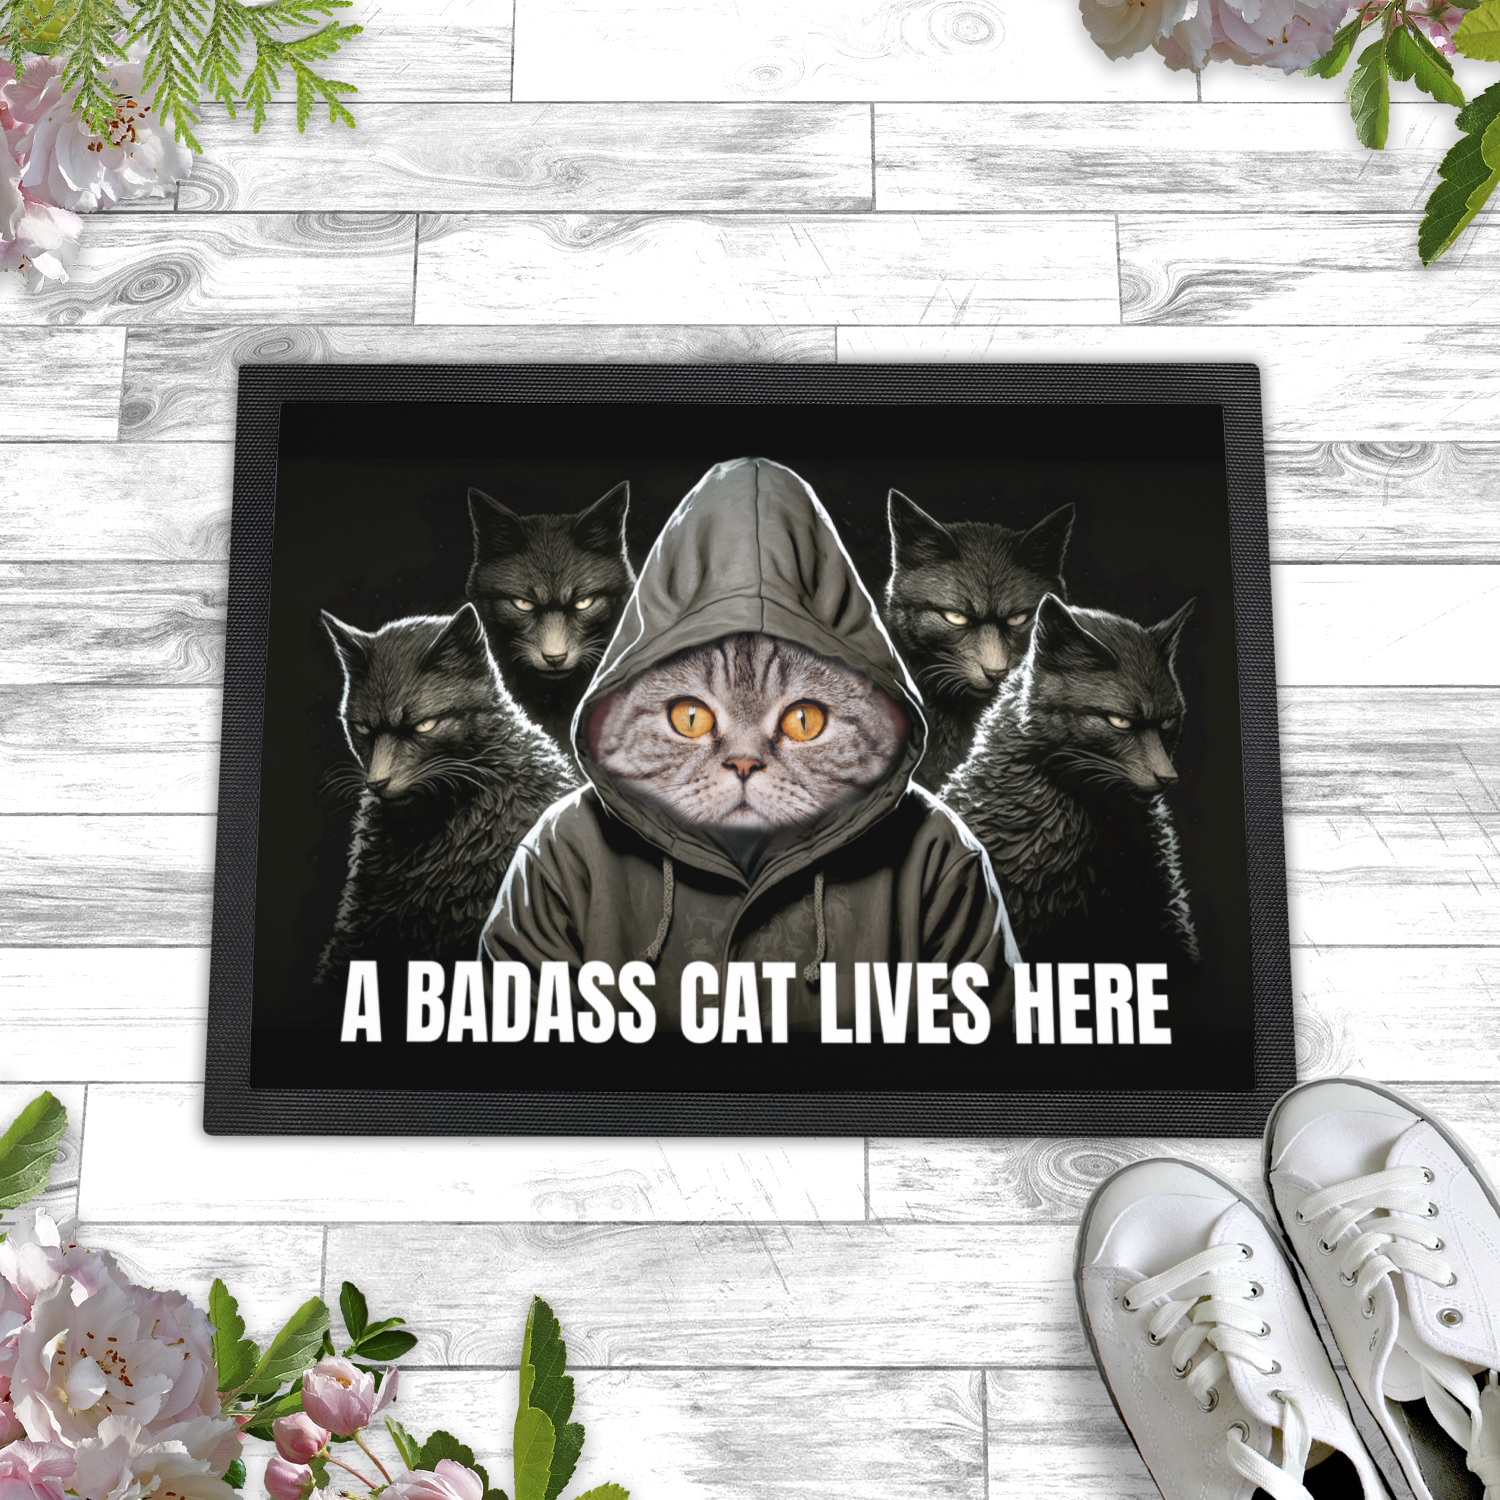 Personalized Doormat - Personalized Doormat - A Badass Cat Lives Here 